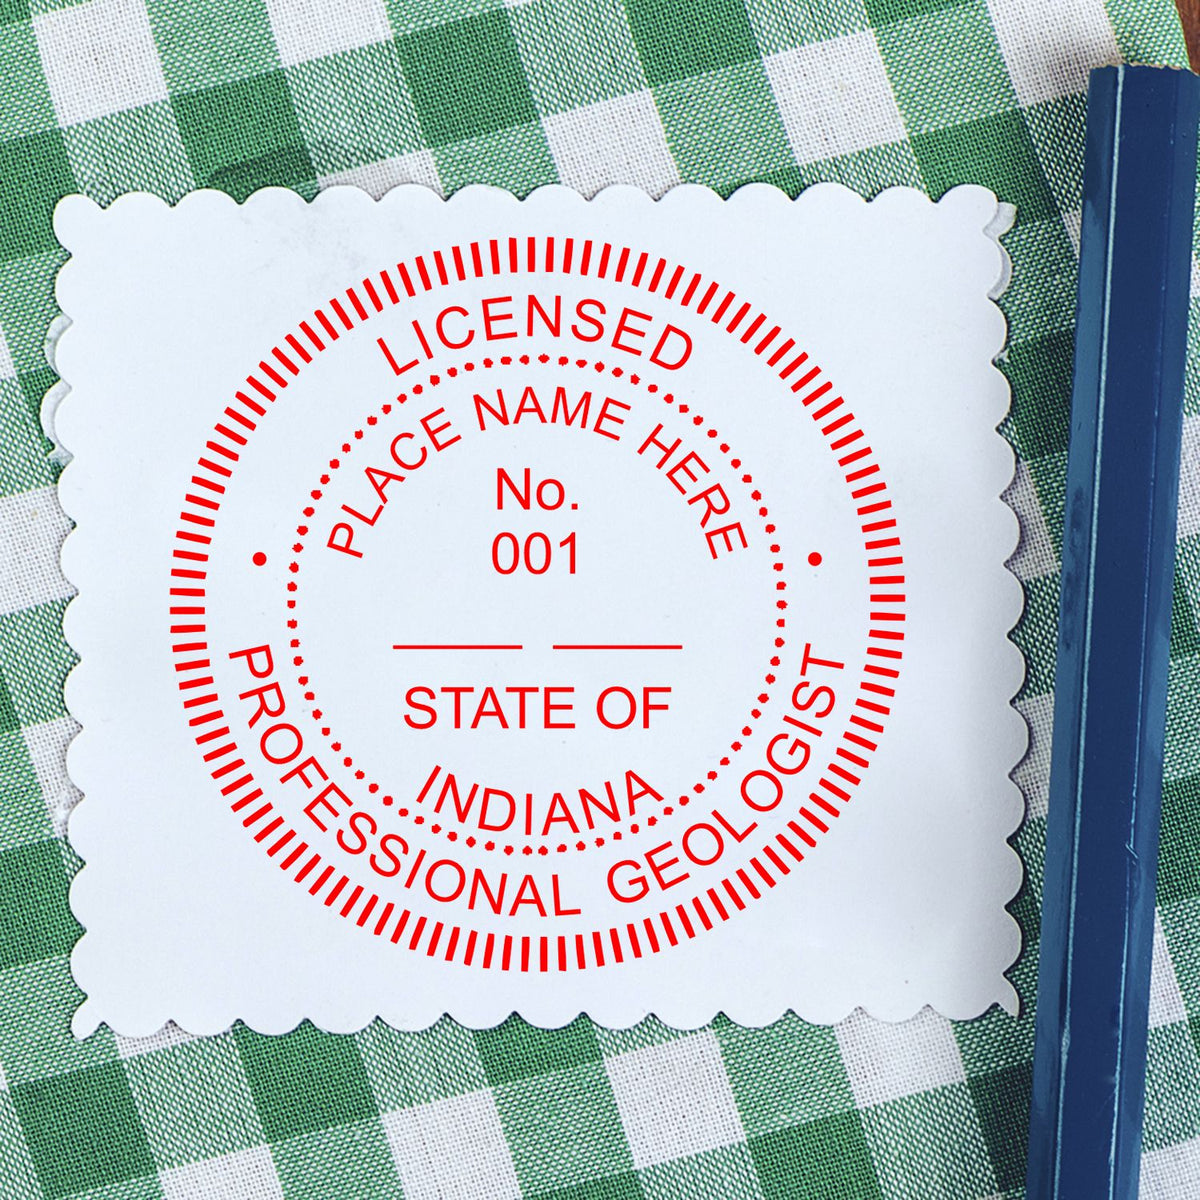 A stamped imprint of the Slim Pre-Inked Indiana Professional Geologist Seal Stamp in this stylish lifestyle photo, setting the tone for a unique and personalized product.